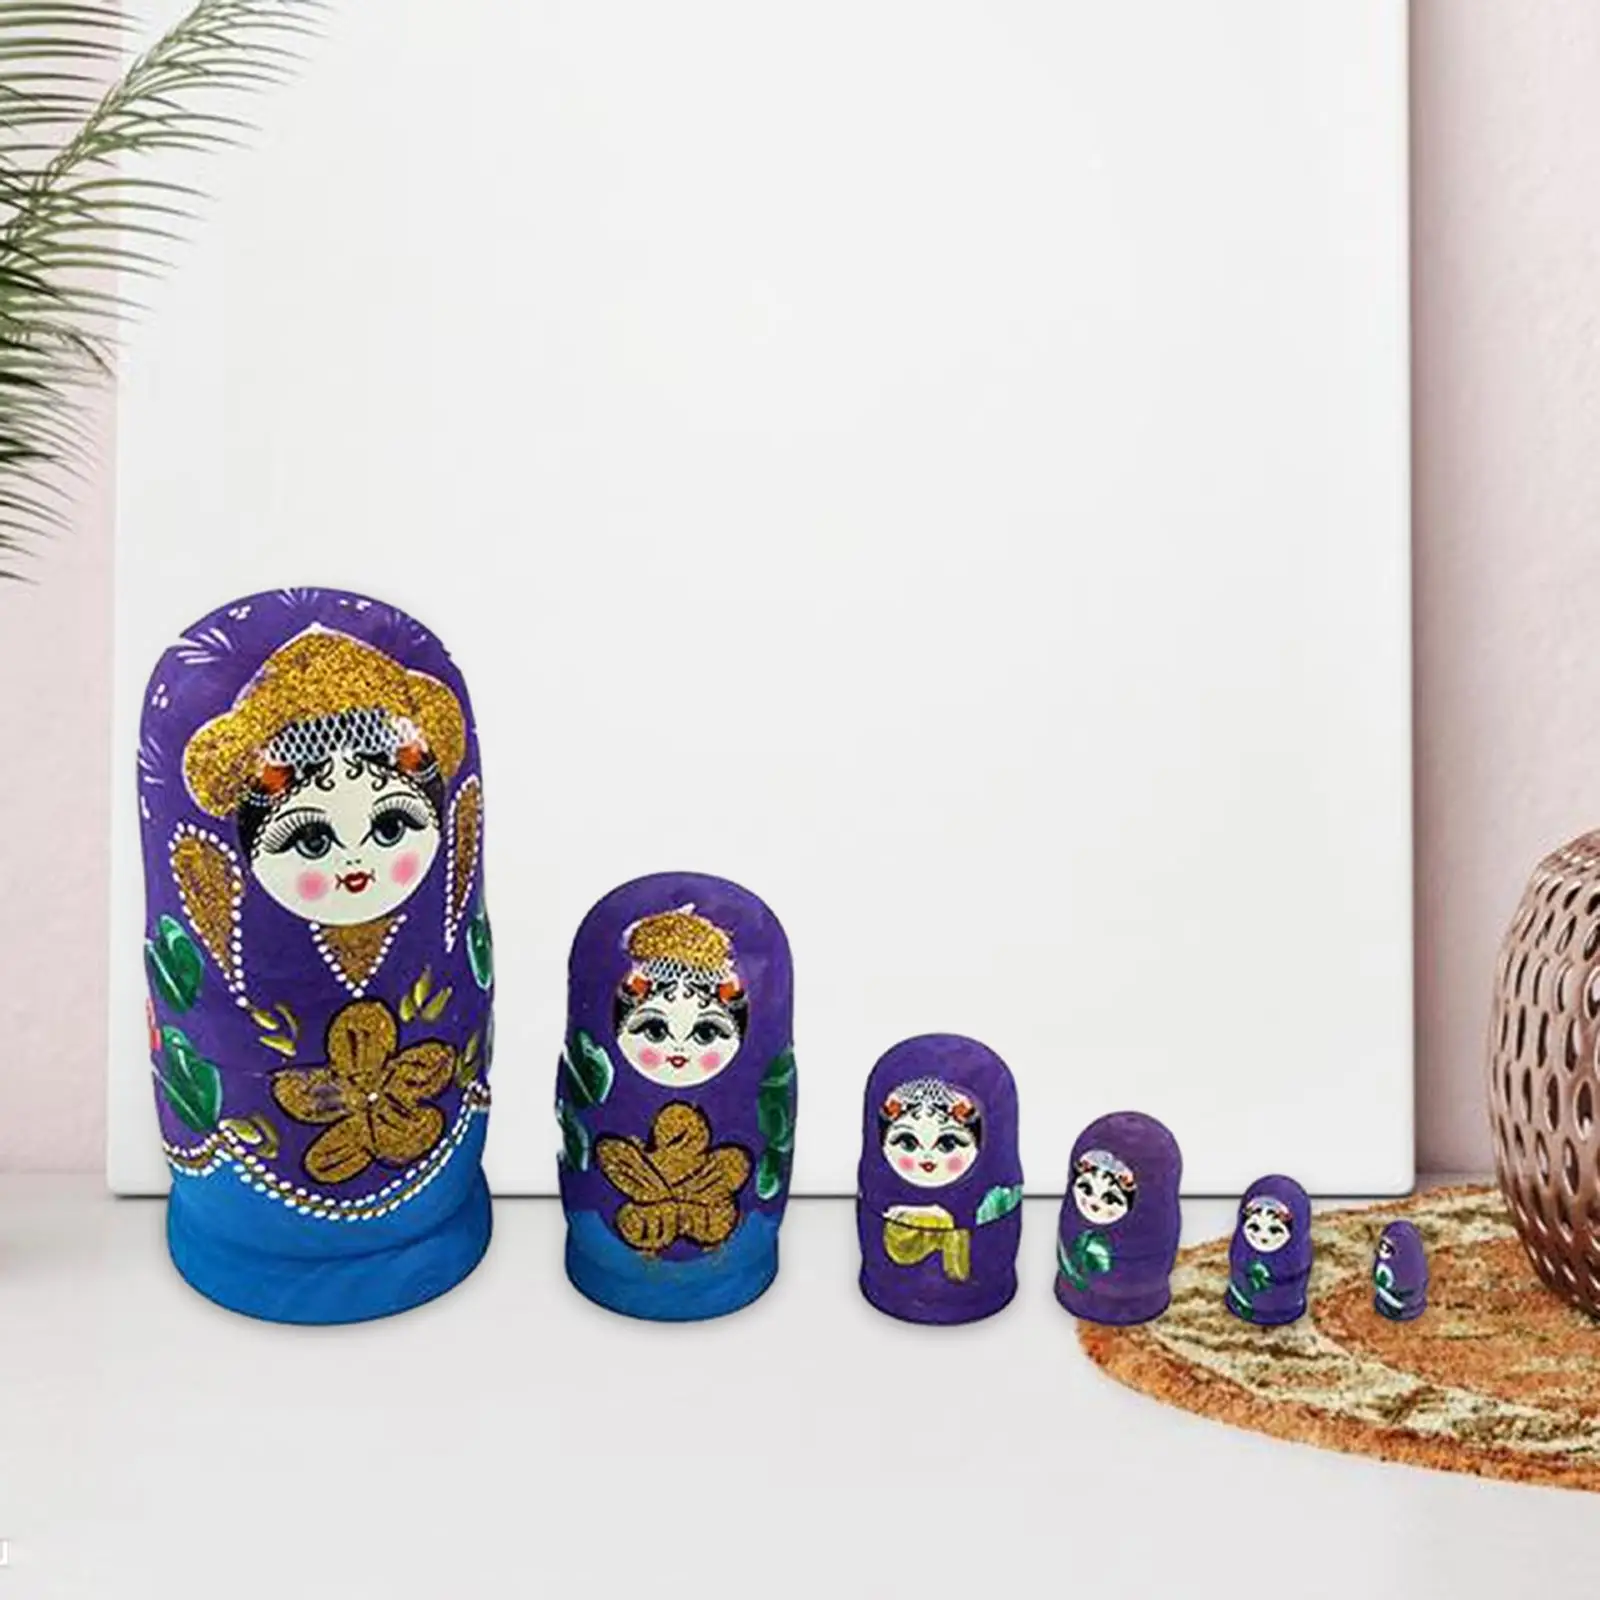 7 Pieces Russian Nesting Doll Matryoshka Dolls for Office Home Birthday Gift